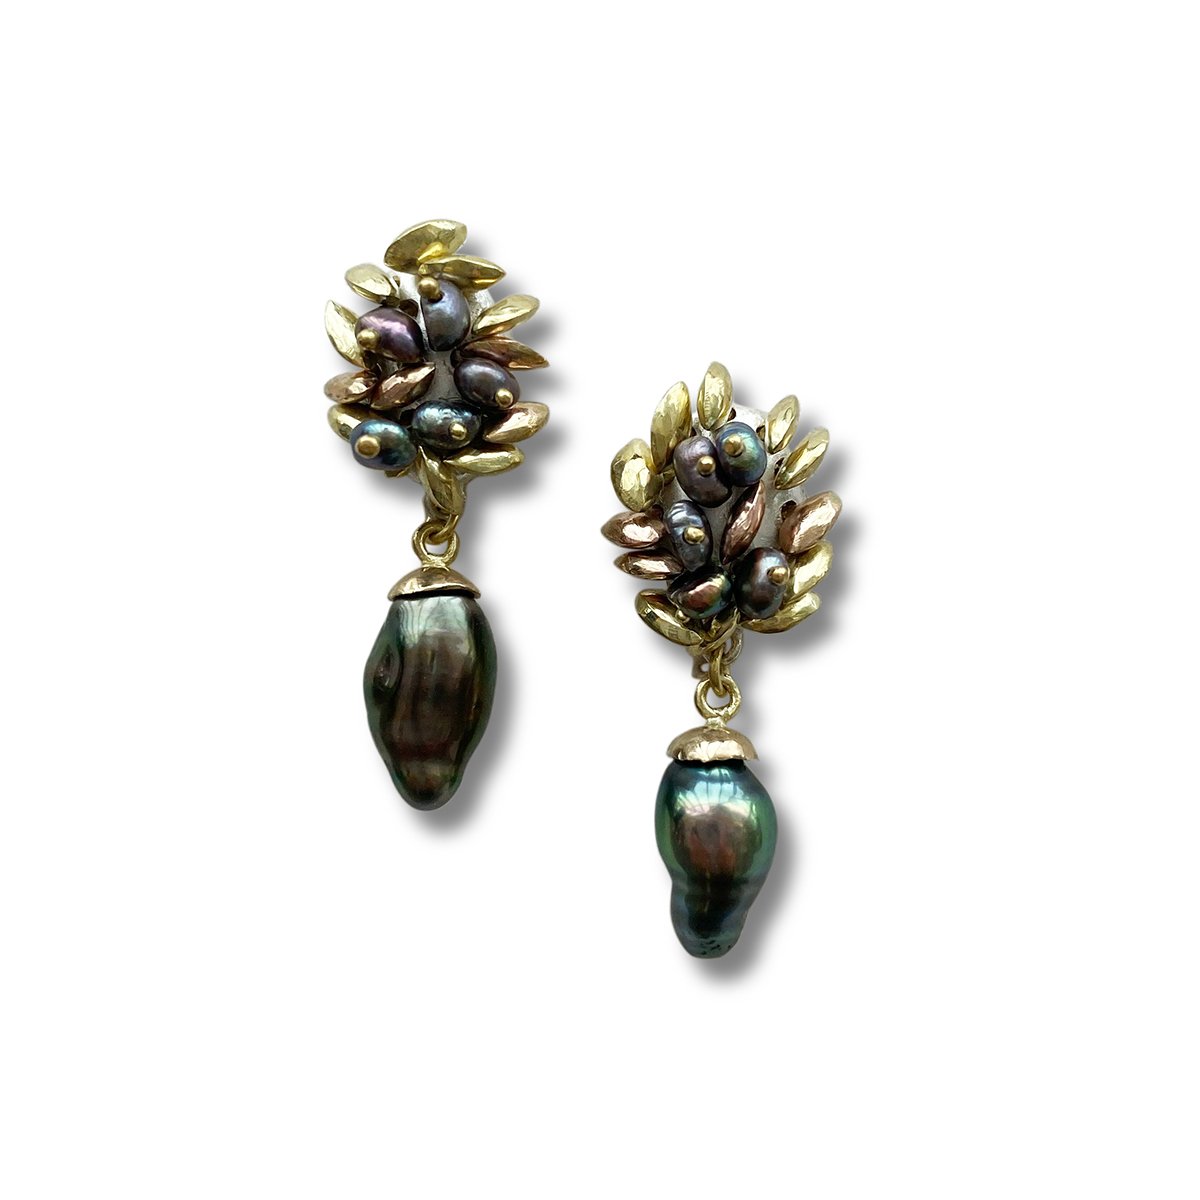 Acini gold earrings with keishi and seed pearls